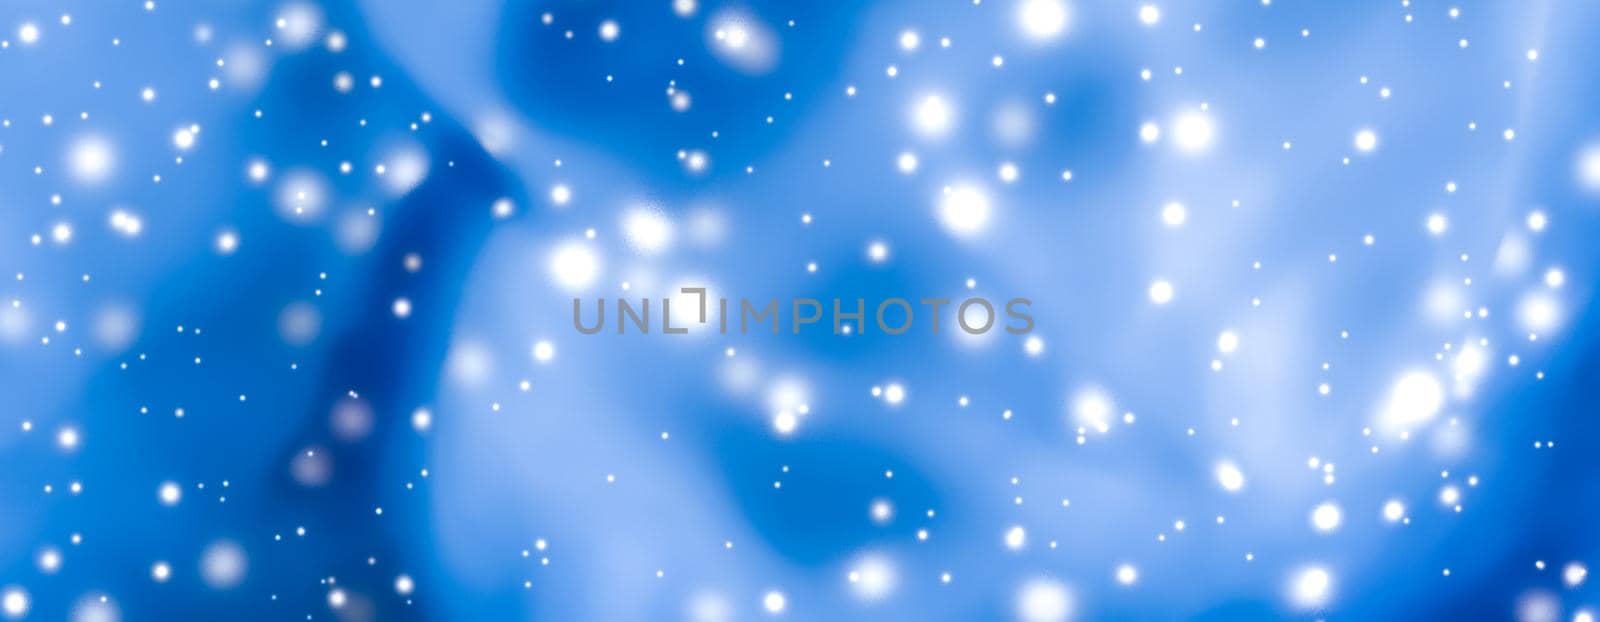 Branding, magic and festive concept - Christmas, New Years and Valentines Day blue abstract background, holidays card design, shiny snow glitter as winter season sale backdrop for luxury beauty brand